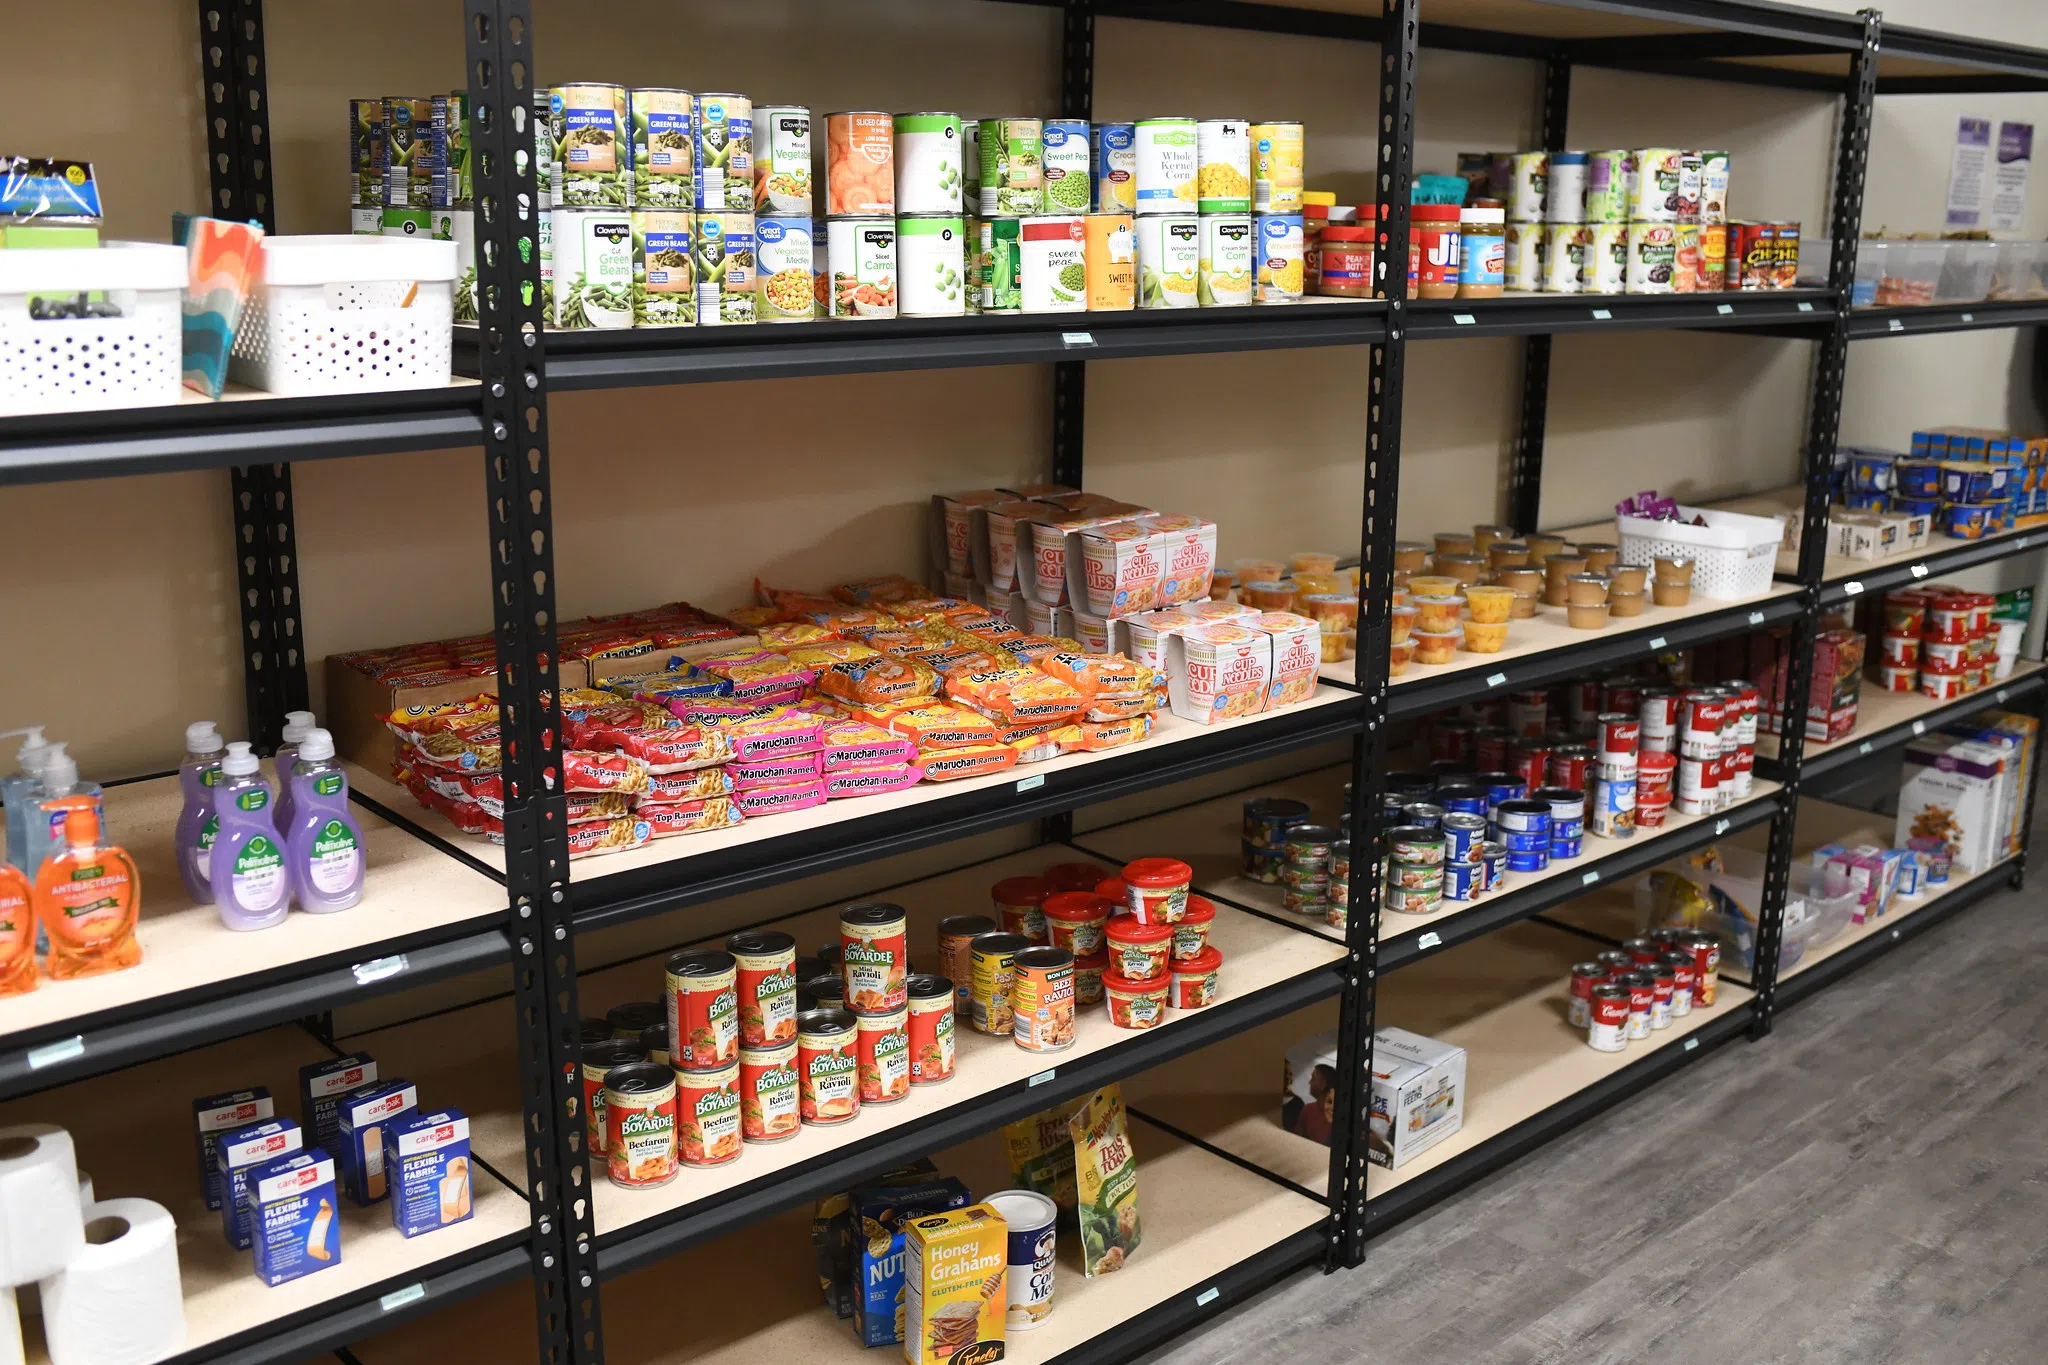 Shelves filled with canned goods and non-perishable food items line a wall.